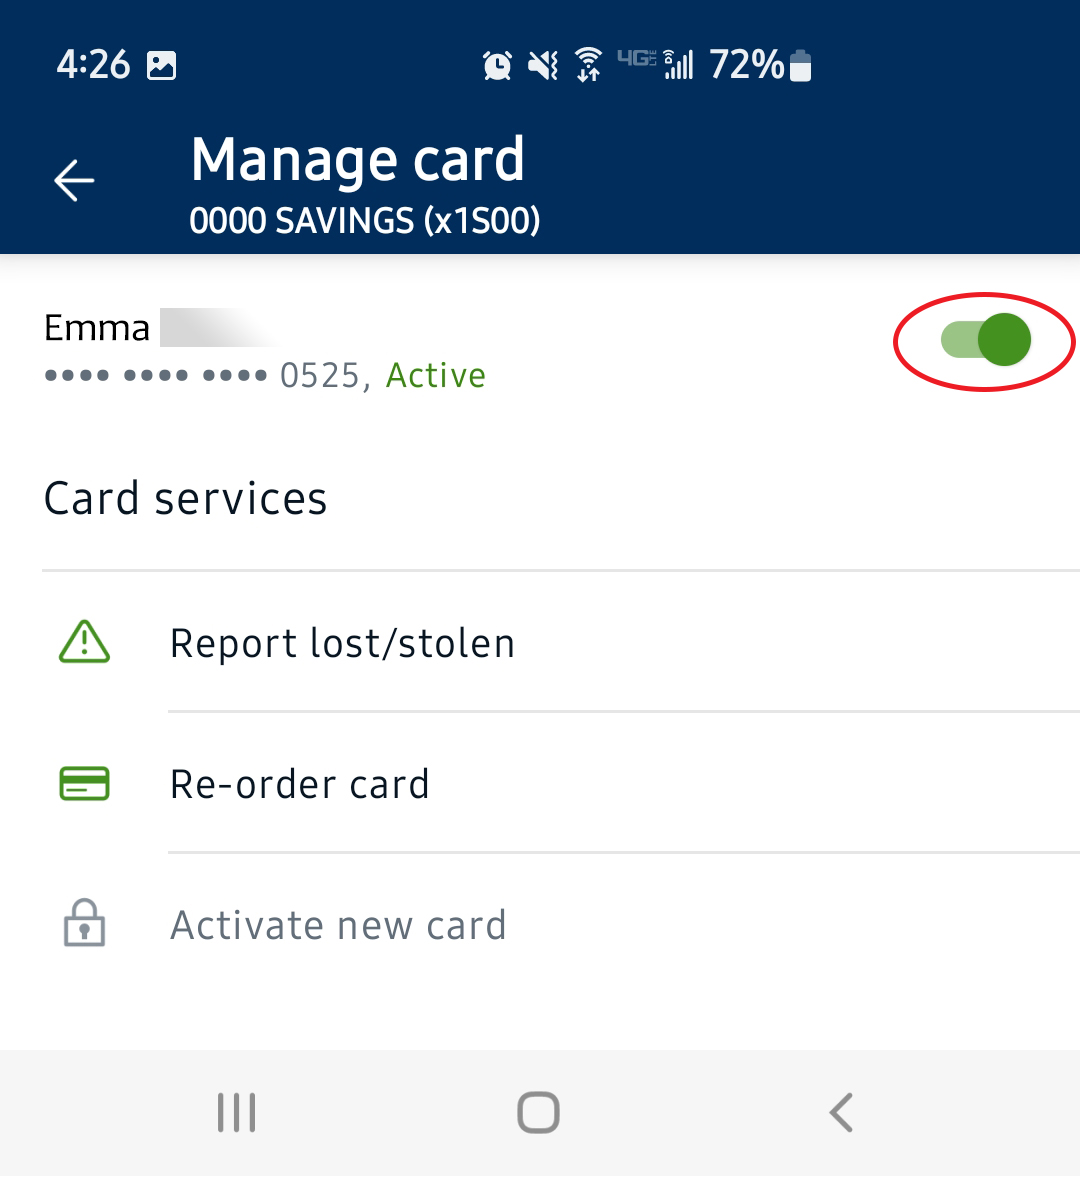 An image of the Manage Card screen